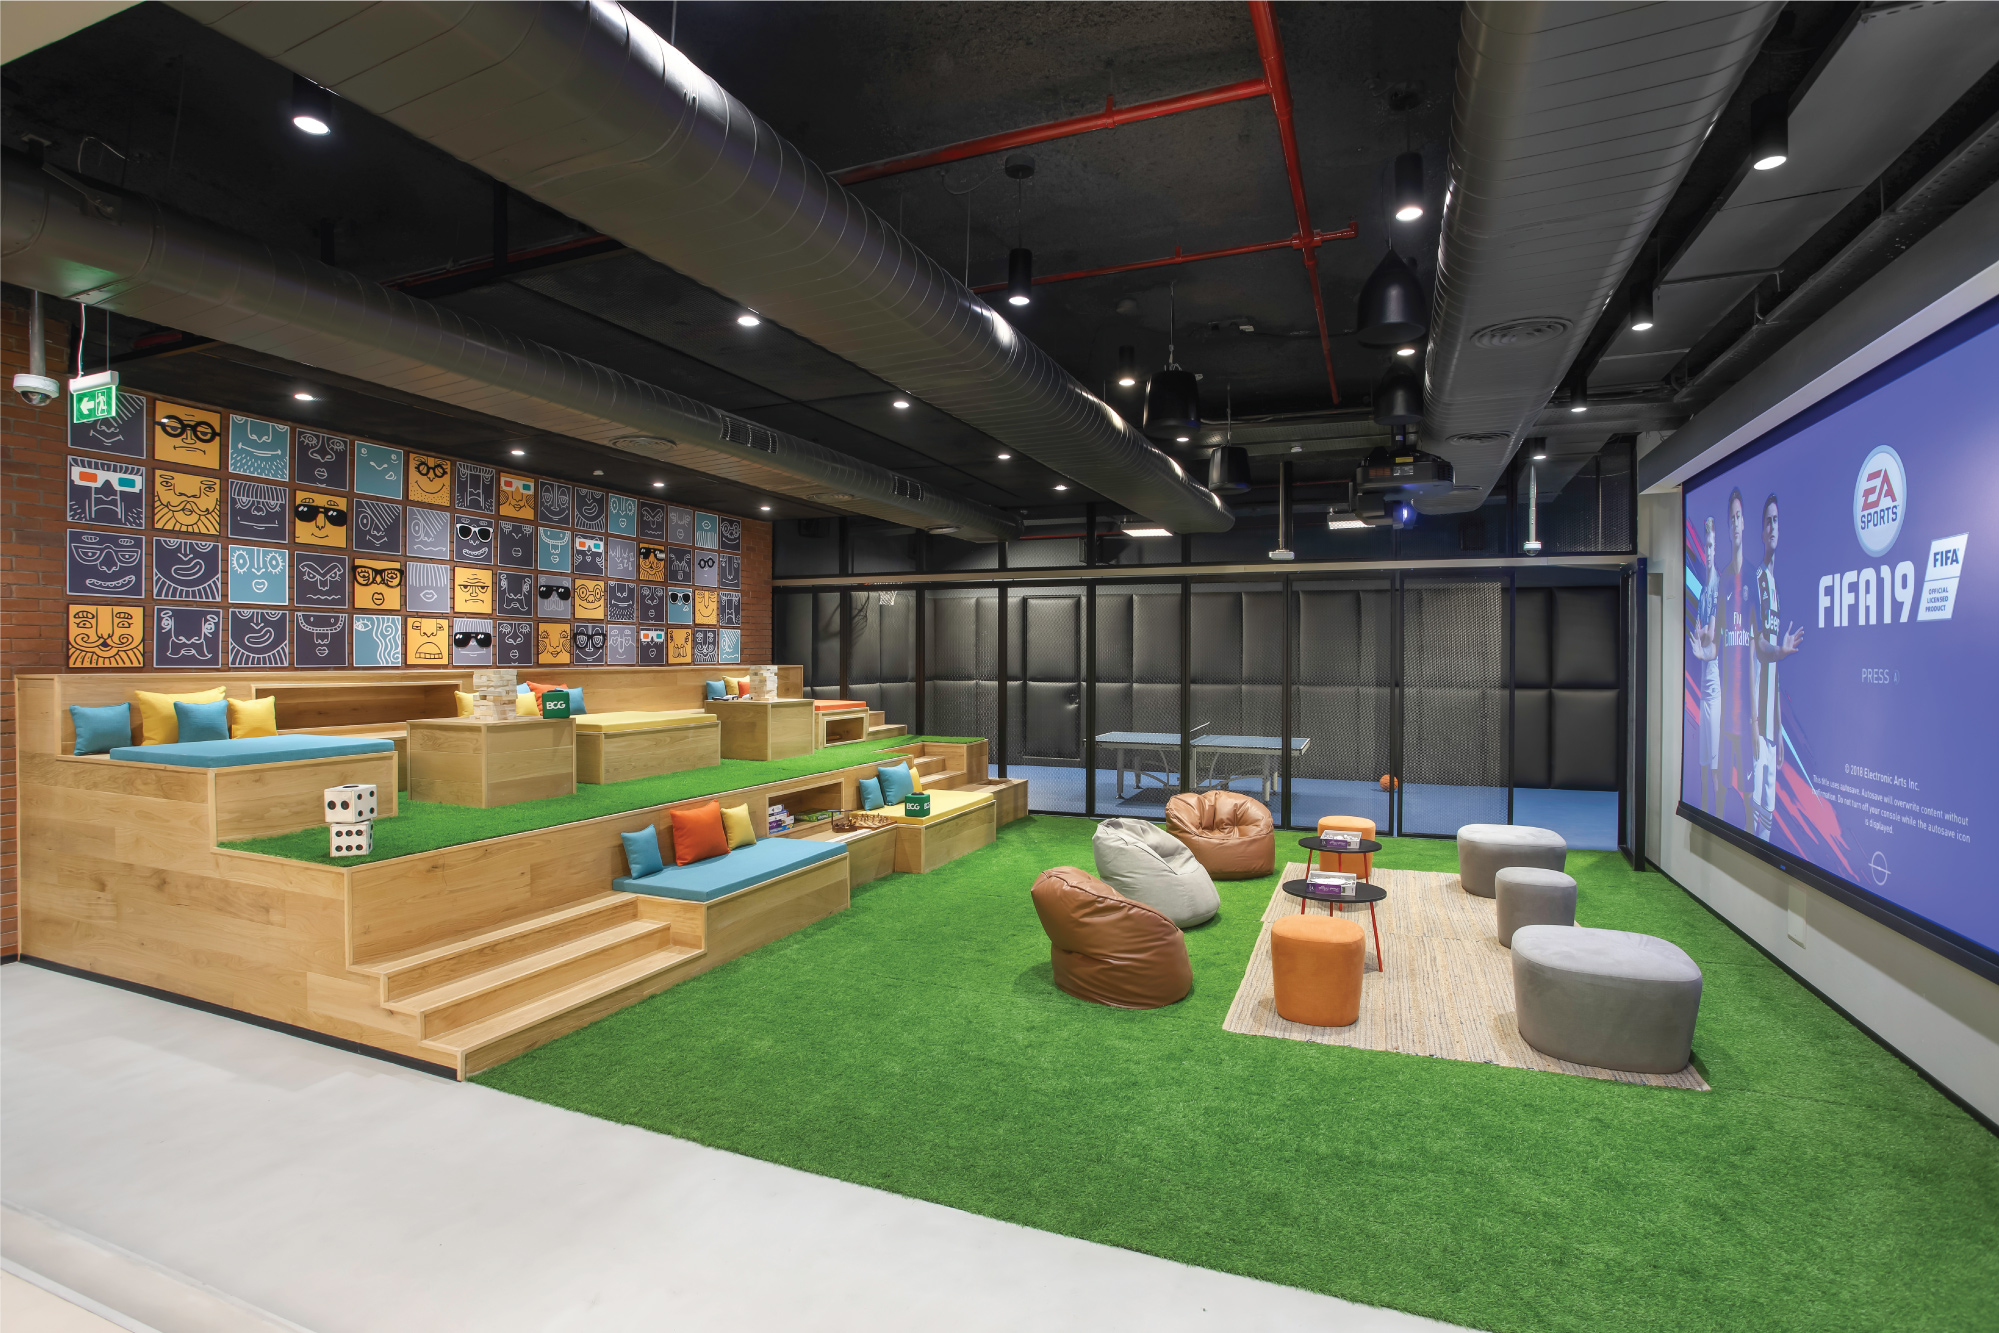 BCG office - space for recreation, enjoyment, and social interactions